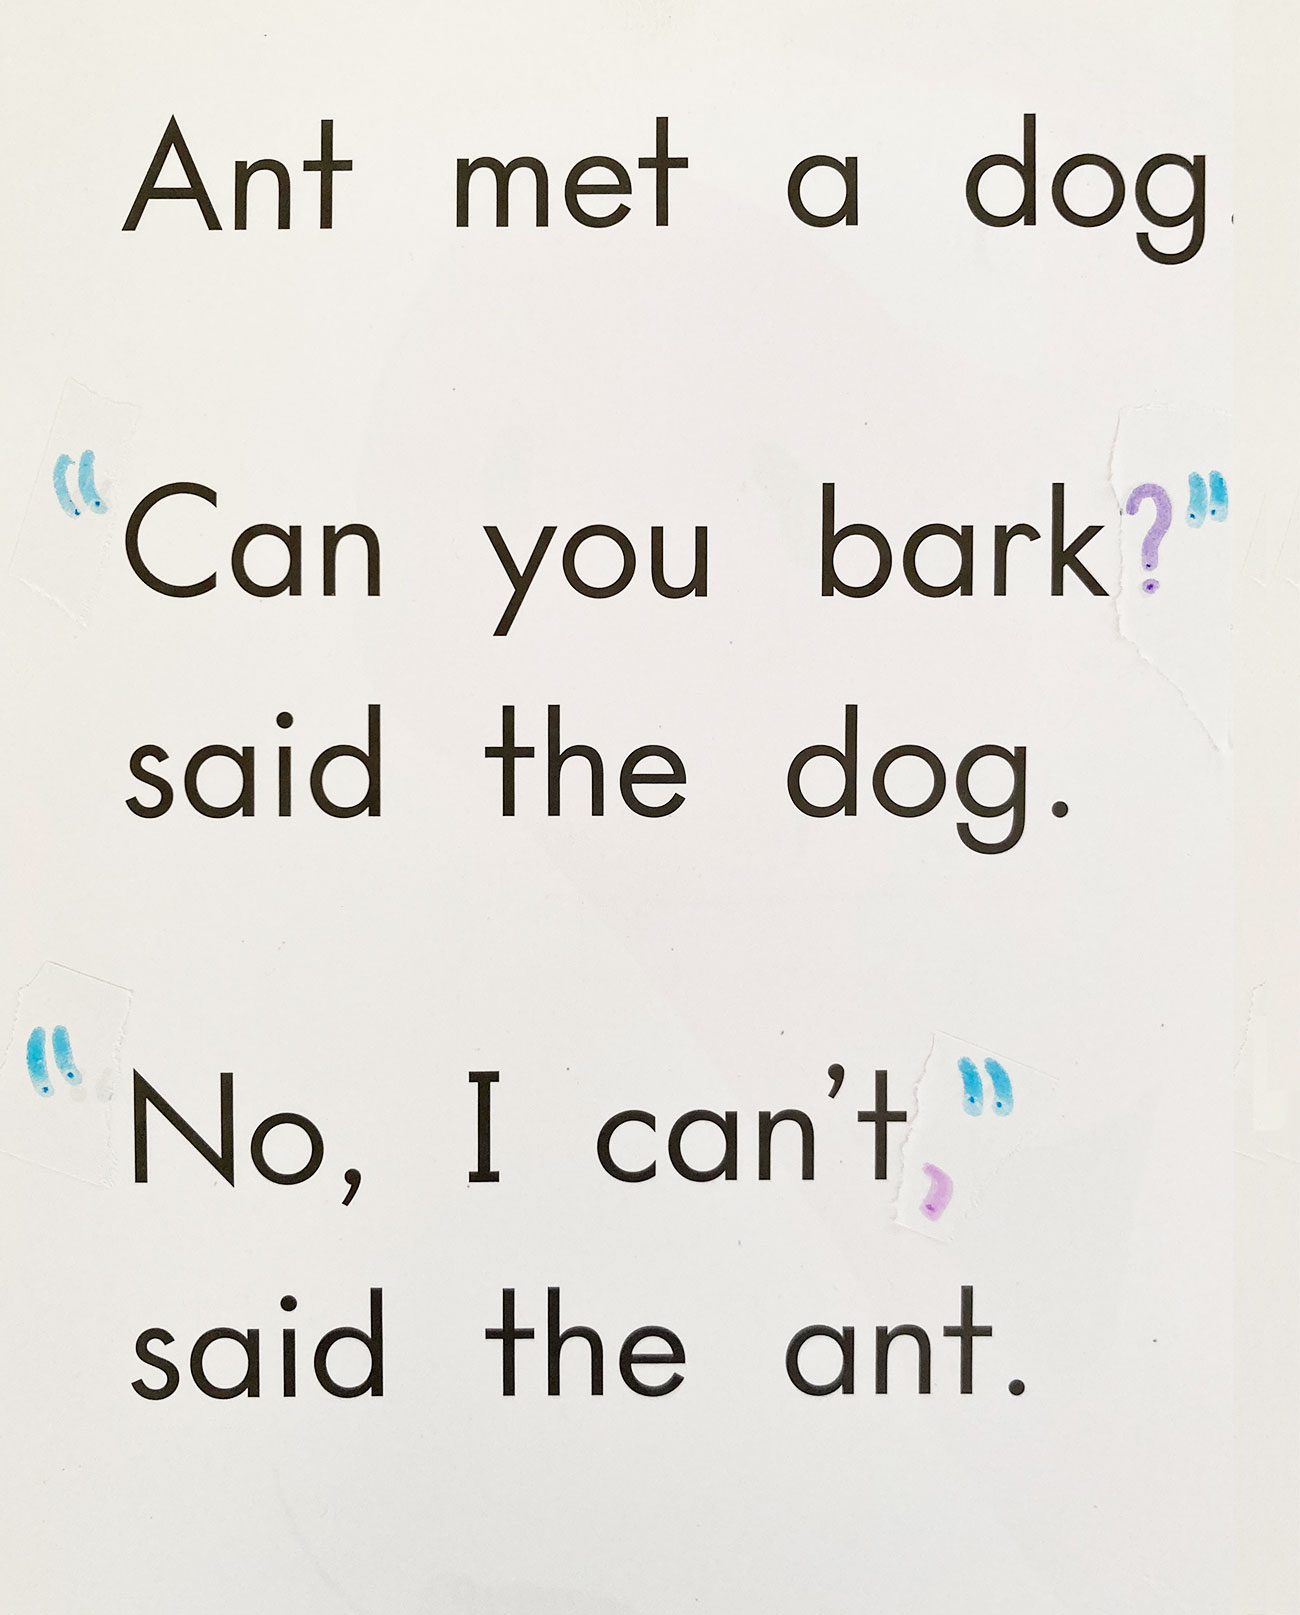 Page from predictable book showing text about a dog and an ant with quotation marks